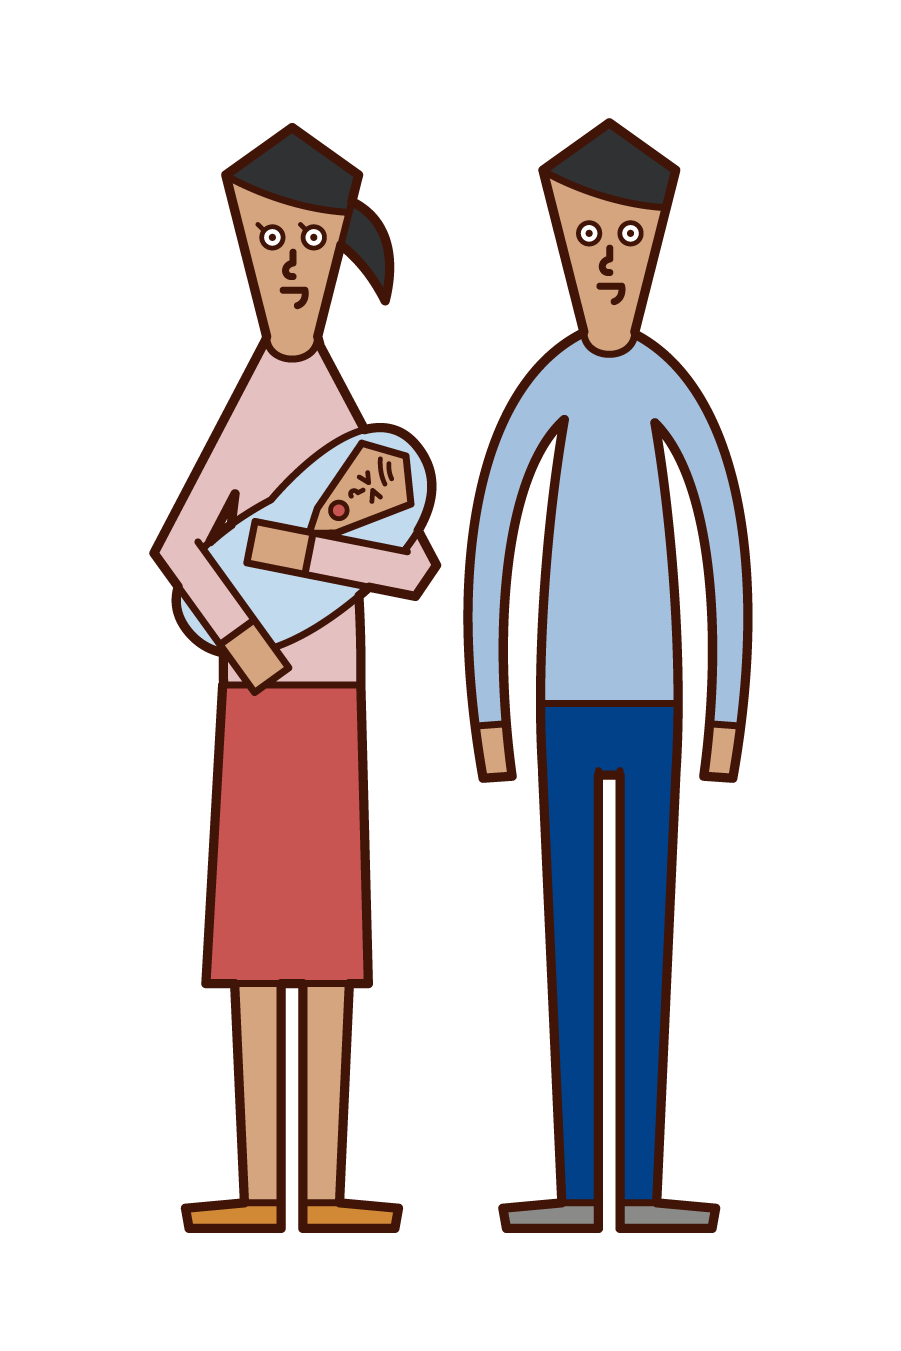 Illustration of a couple holding a child